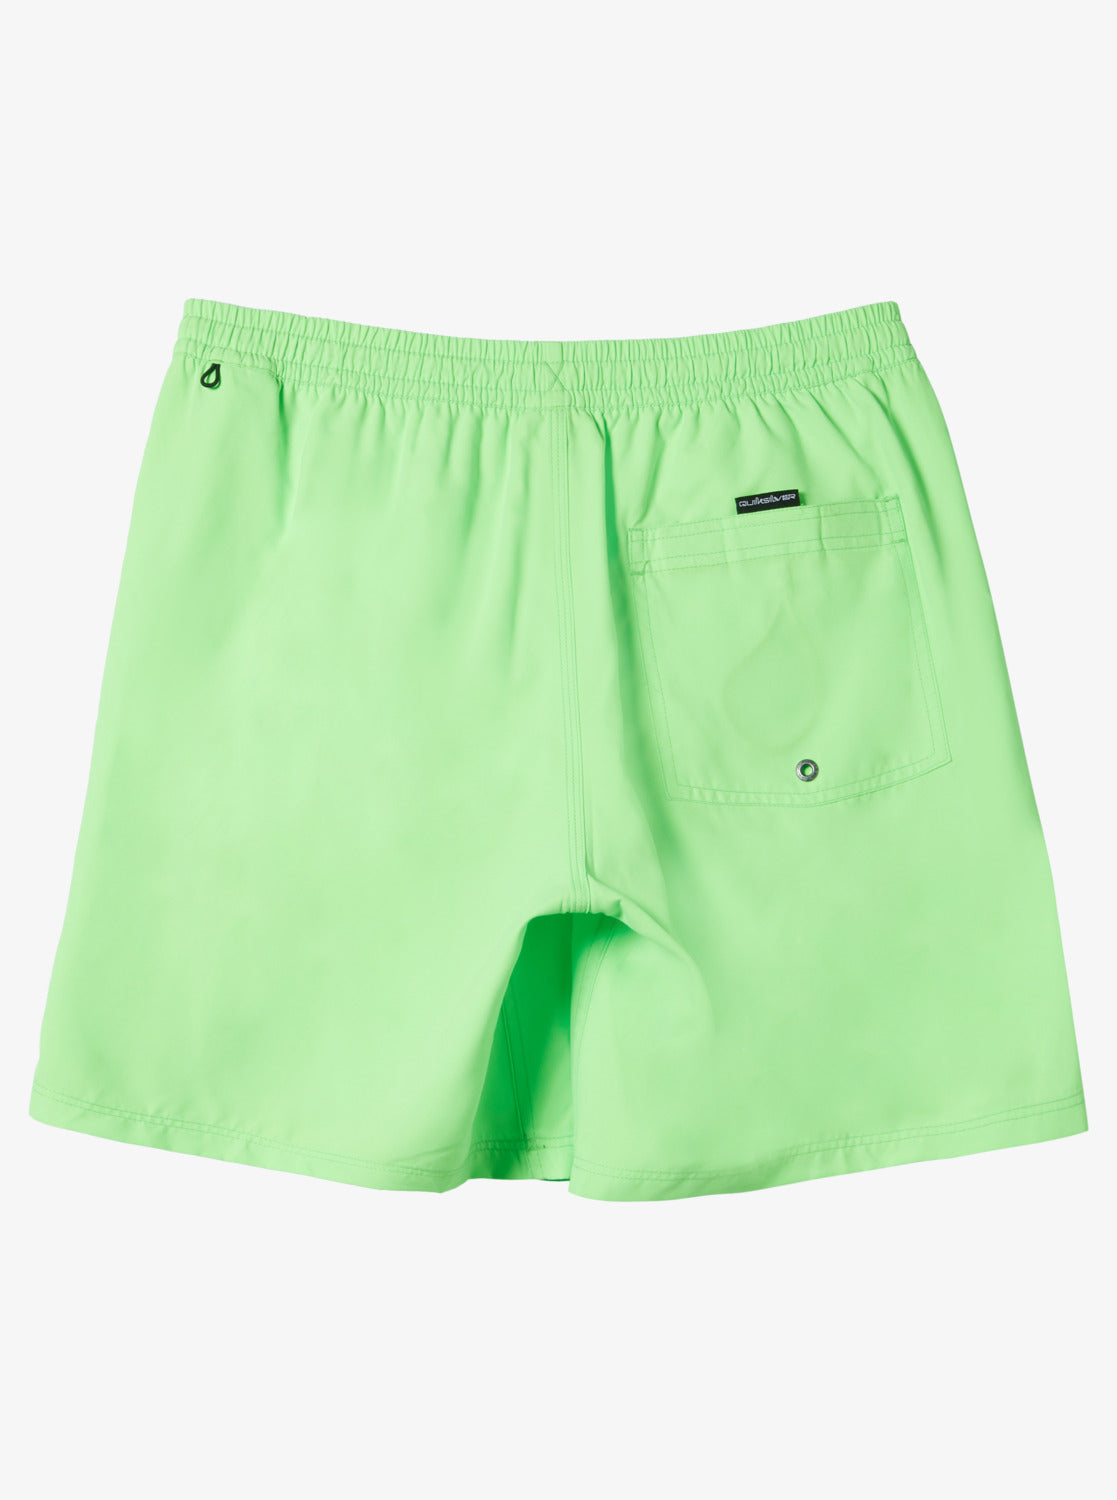 Cheeky Shorts in silver green